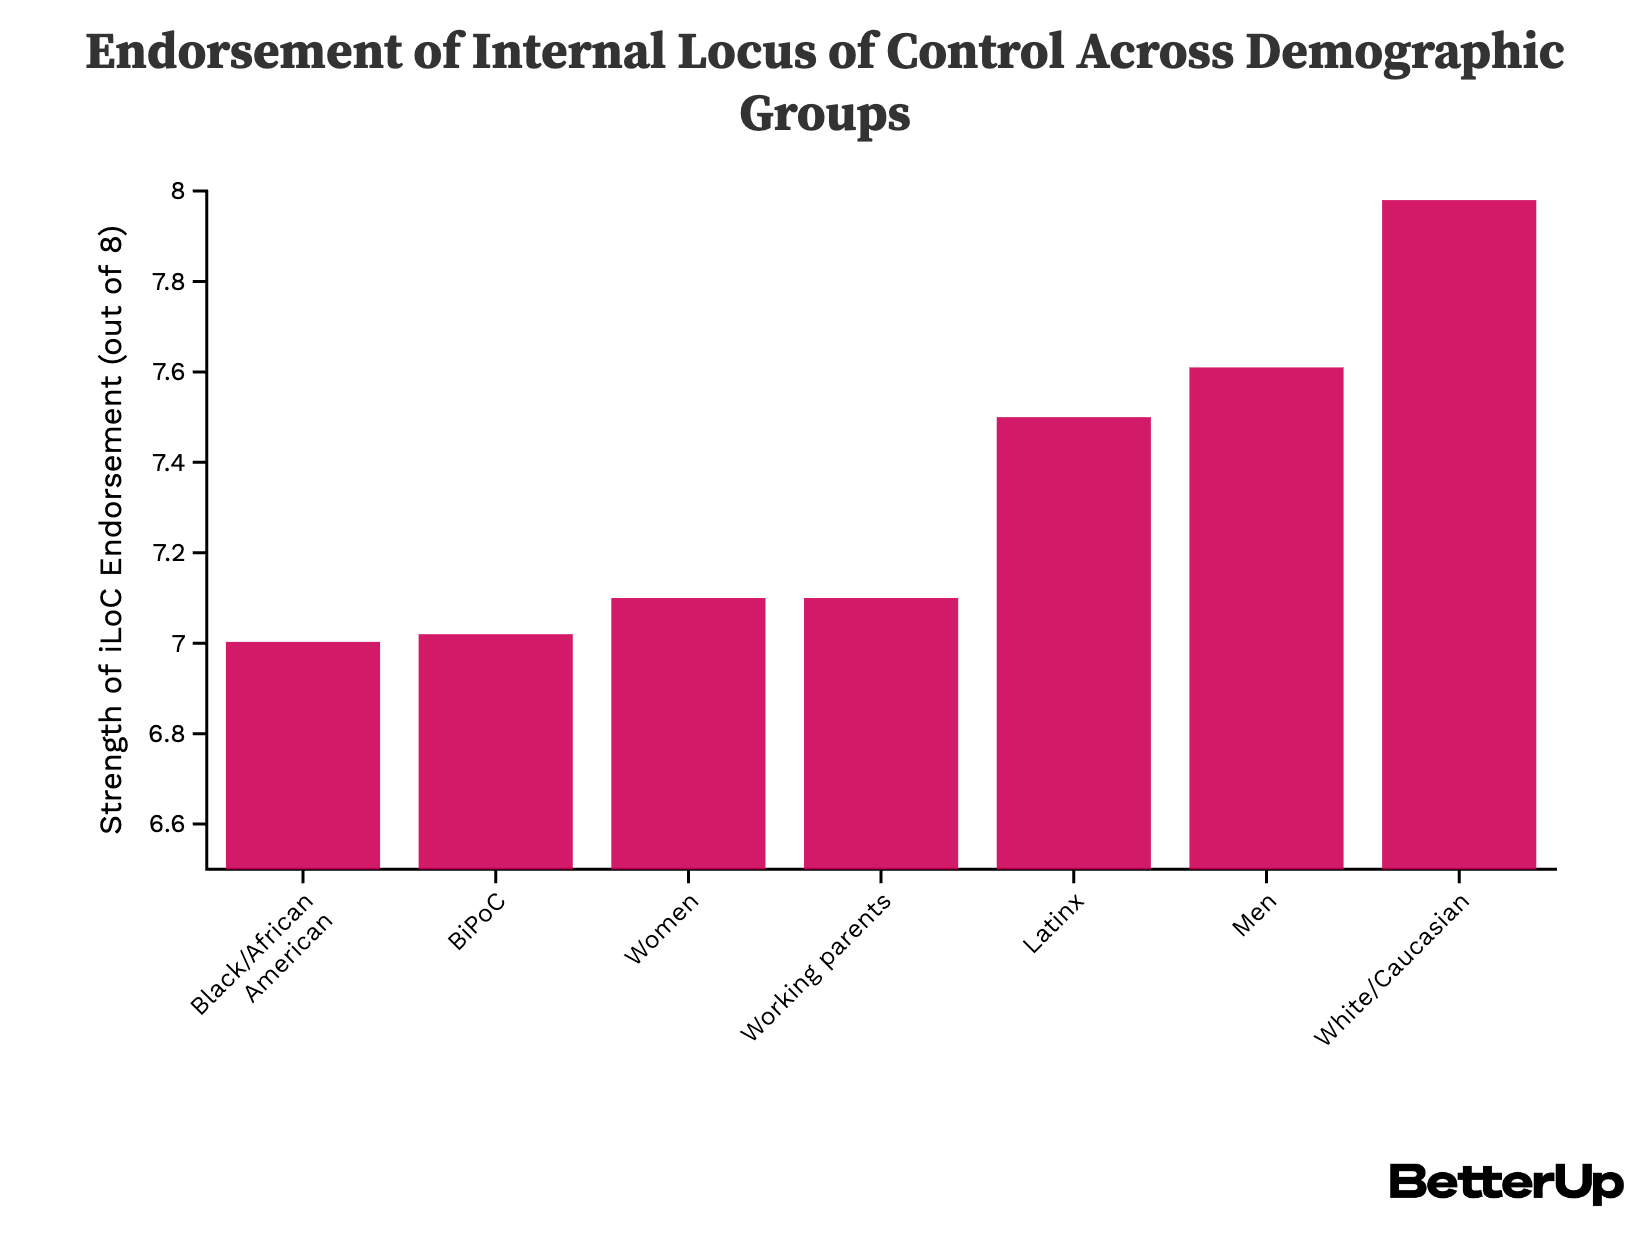 bar graph showing endorsement of internal locus of control across different demographic groups